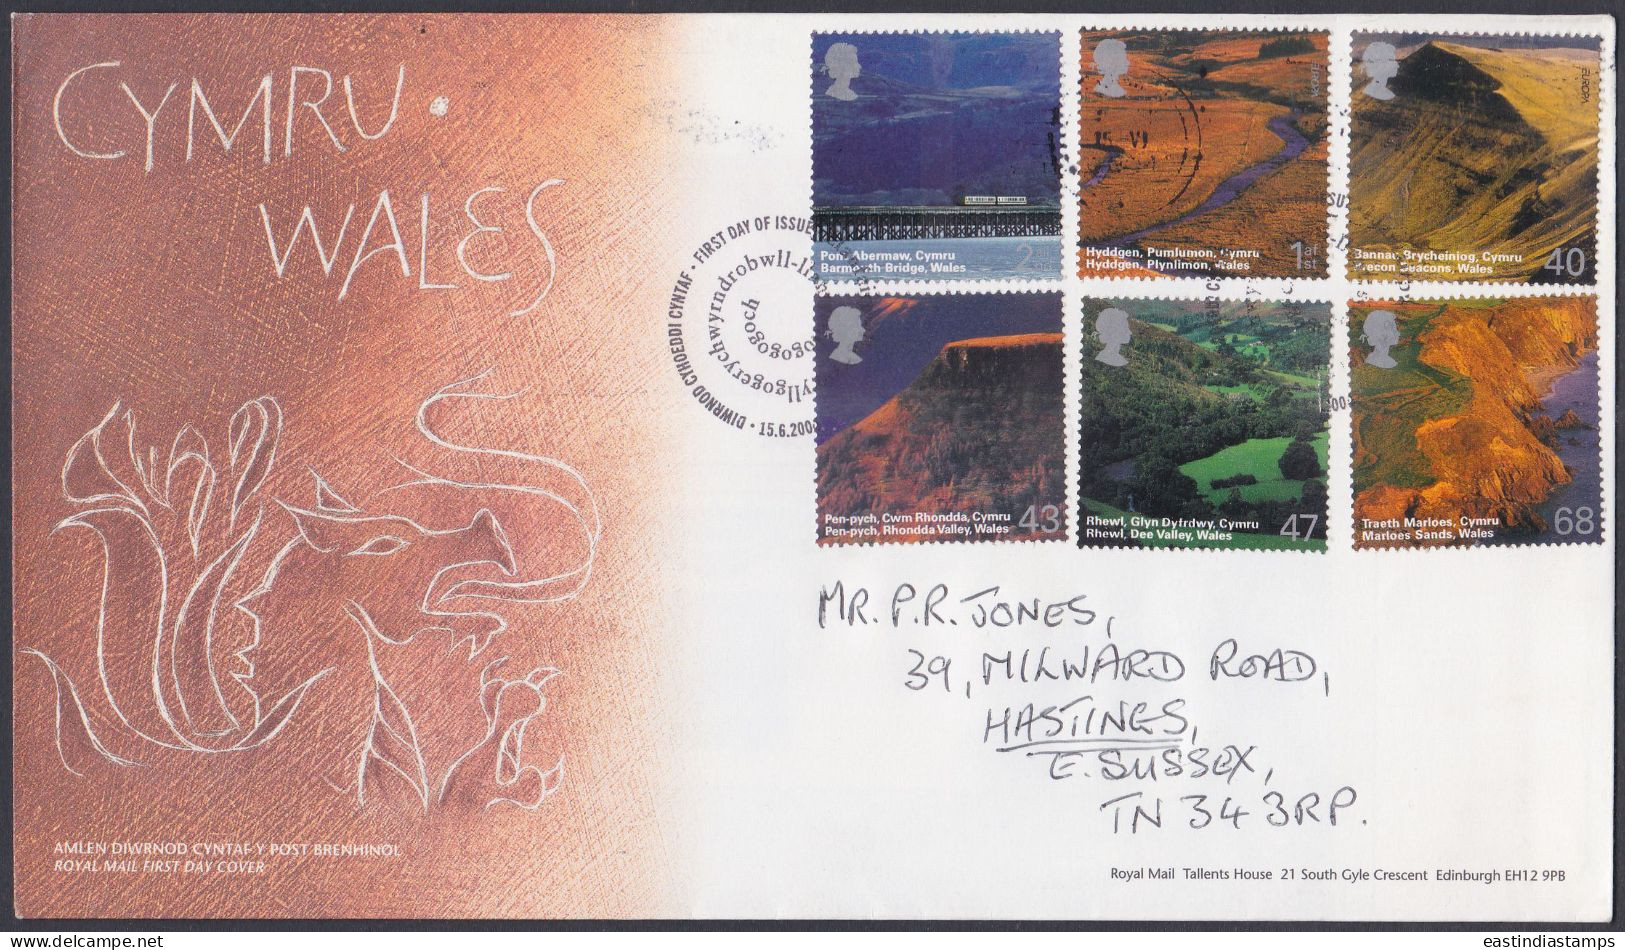 GB Great Britain 2000 FDC Cymru, Wales, Welsh, Natural, River, Cliff, Mountain, Landscape, Bridge, Railway, Train, Cover - Covers & Documents